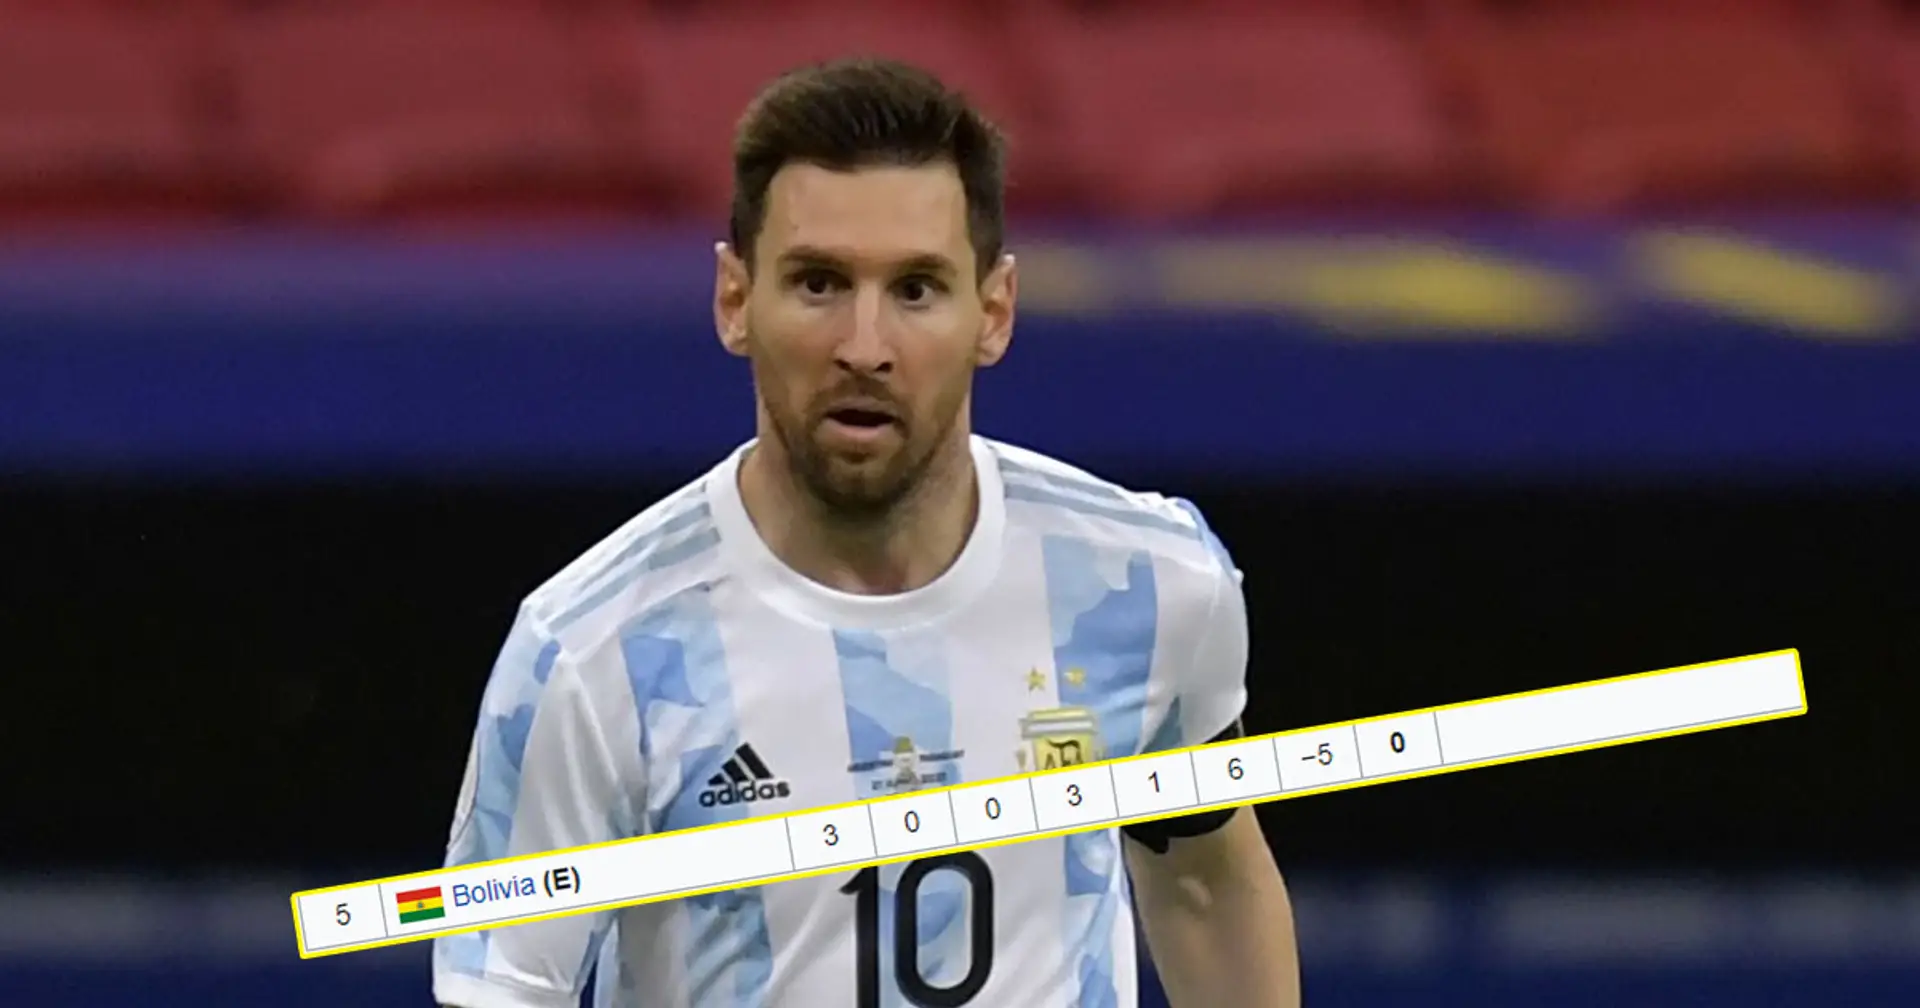 No time for rest: Messi expected to play vs Bolivia despite Argentina already qualifying for next stage